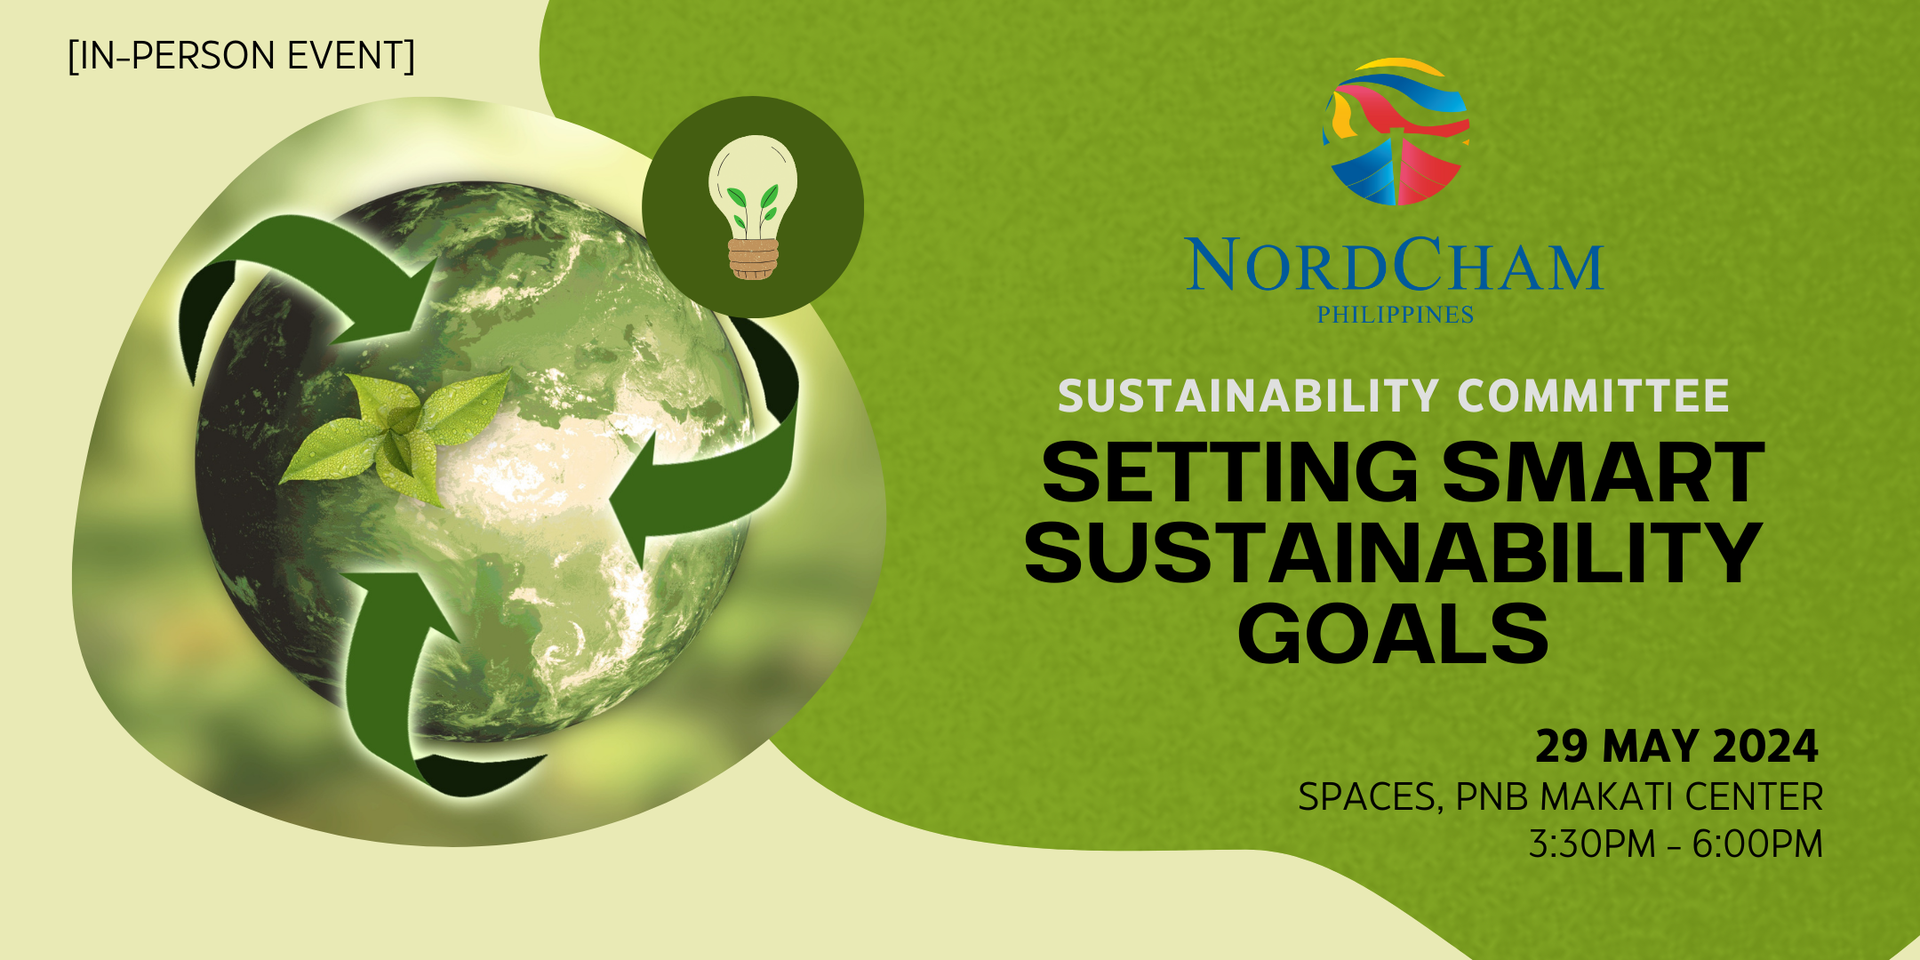 thumbnails SUSTAINABILITY COMMITTEE MEETING: SETTING SMART SUSTAINABILITY GOALS | 29 MAY 2024 | SPACES, PNB MAKATI CENTER